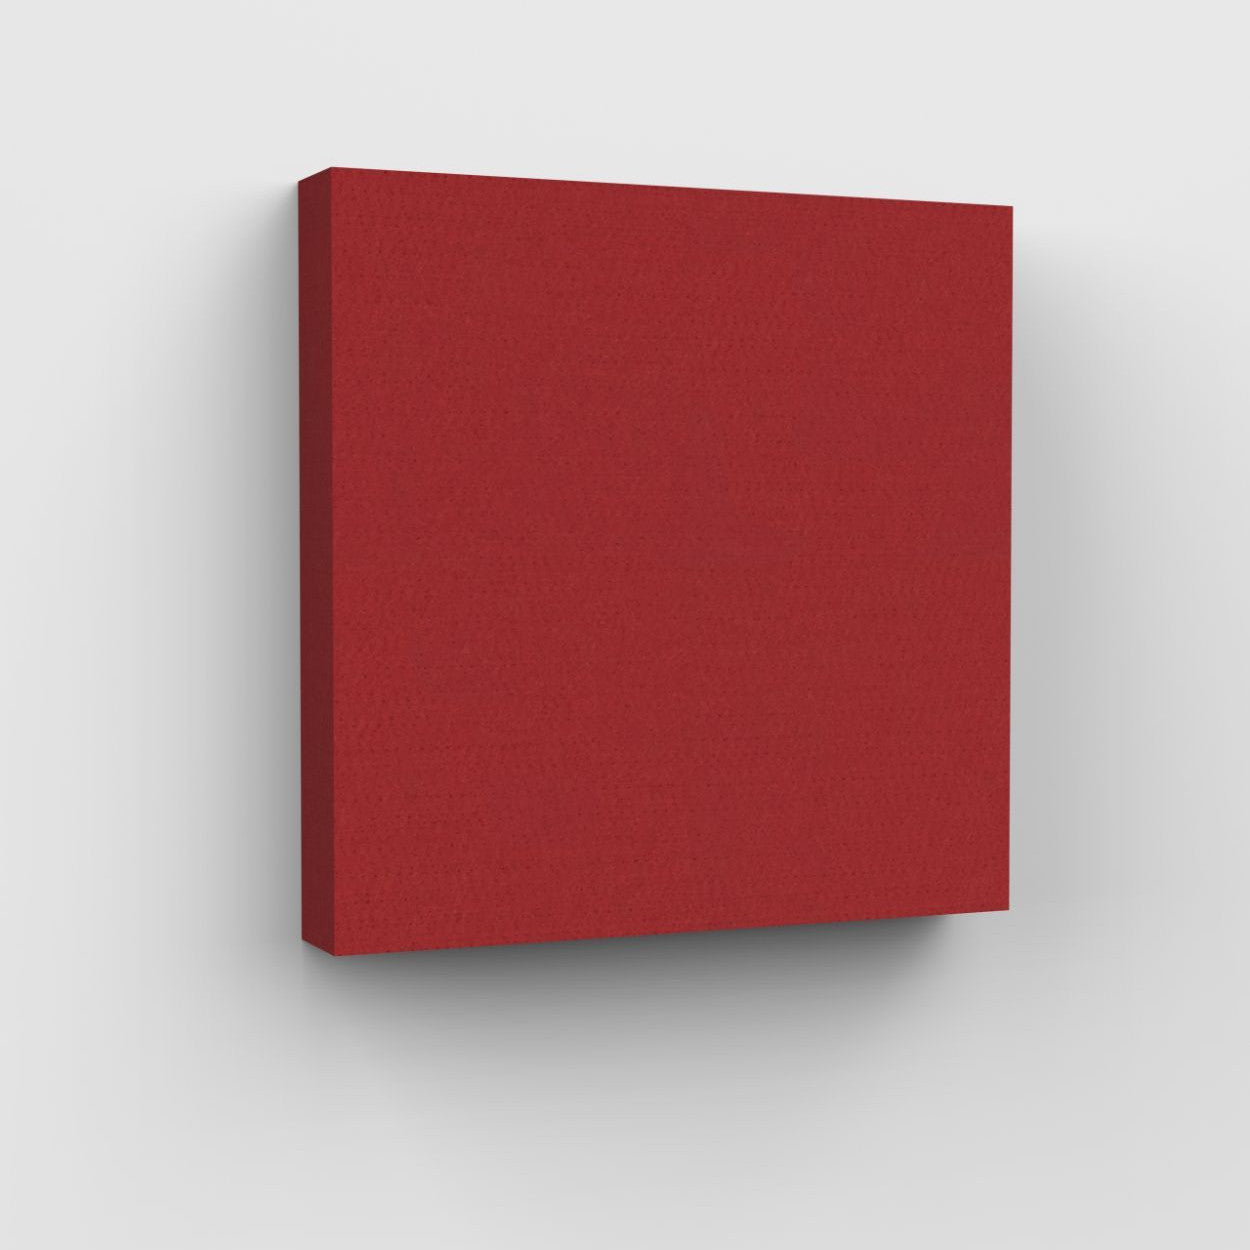 100% Recycled PET Felt Acoustic Square 90mm Red | Plastock